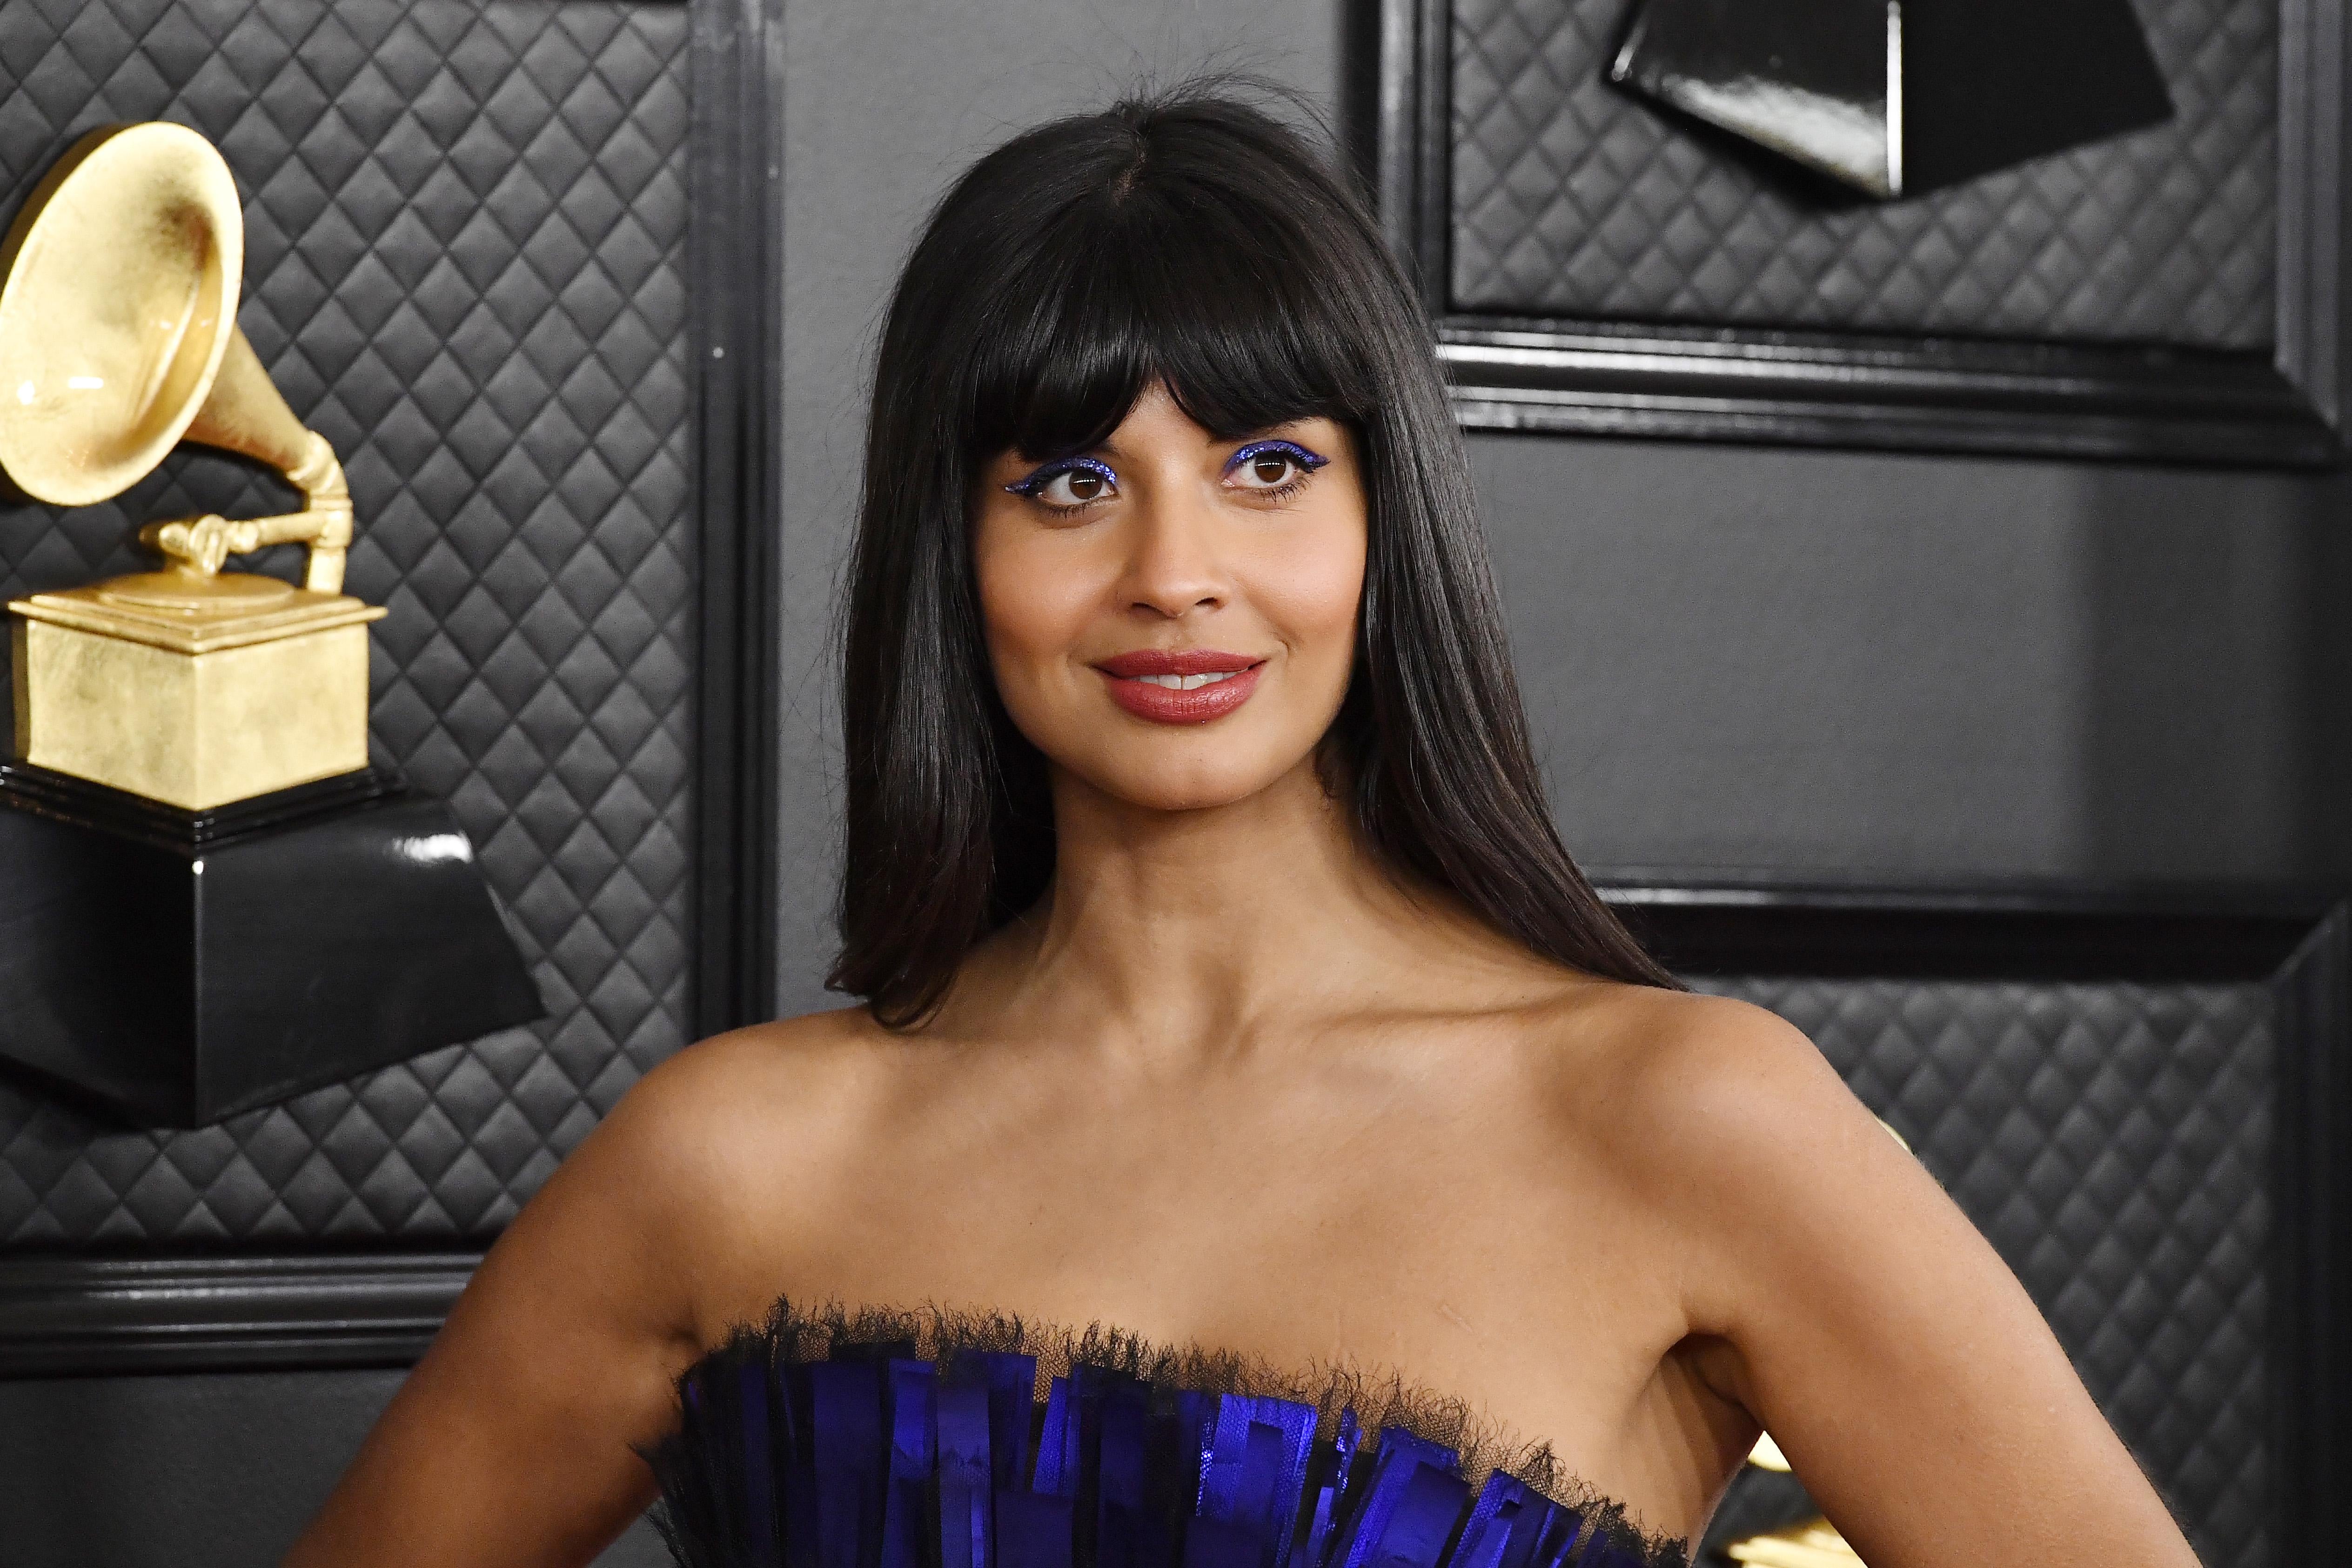 Jameela Jamil in a strapless purple dress on the Grammys red carpet